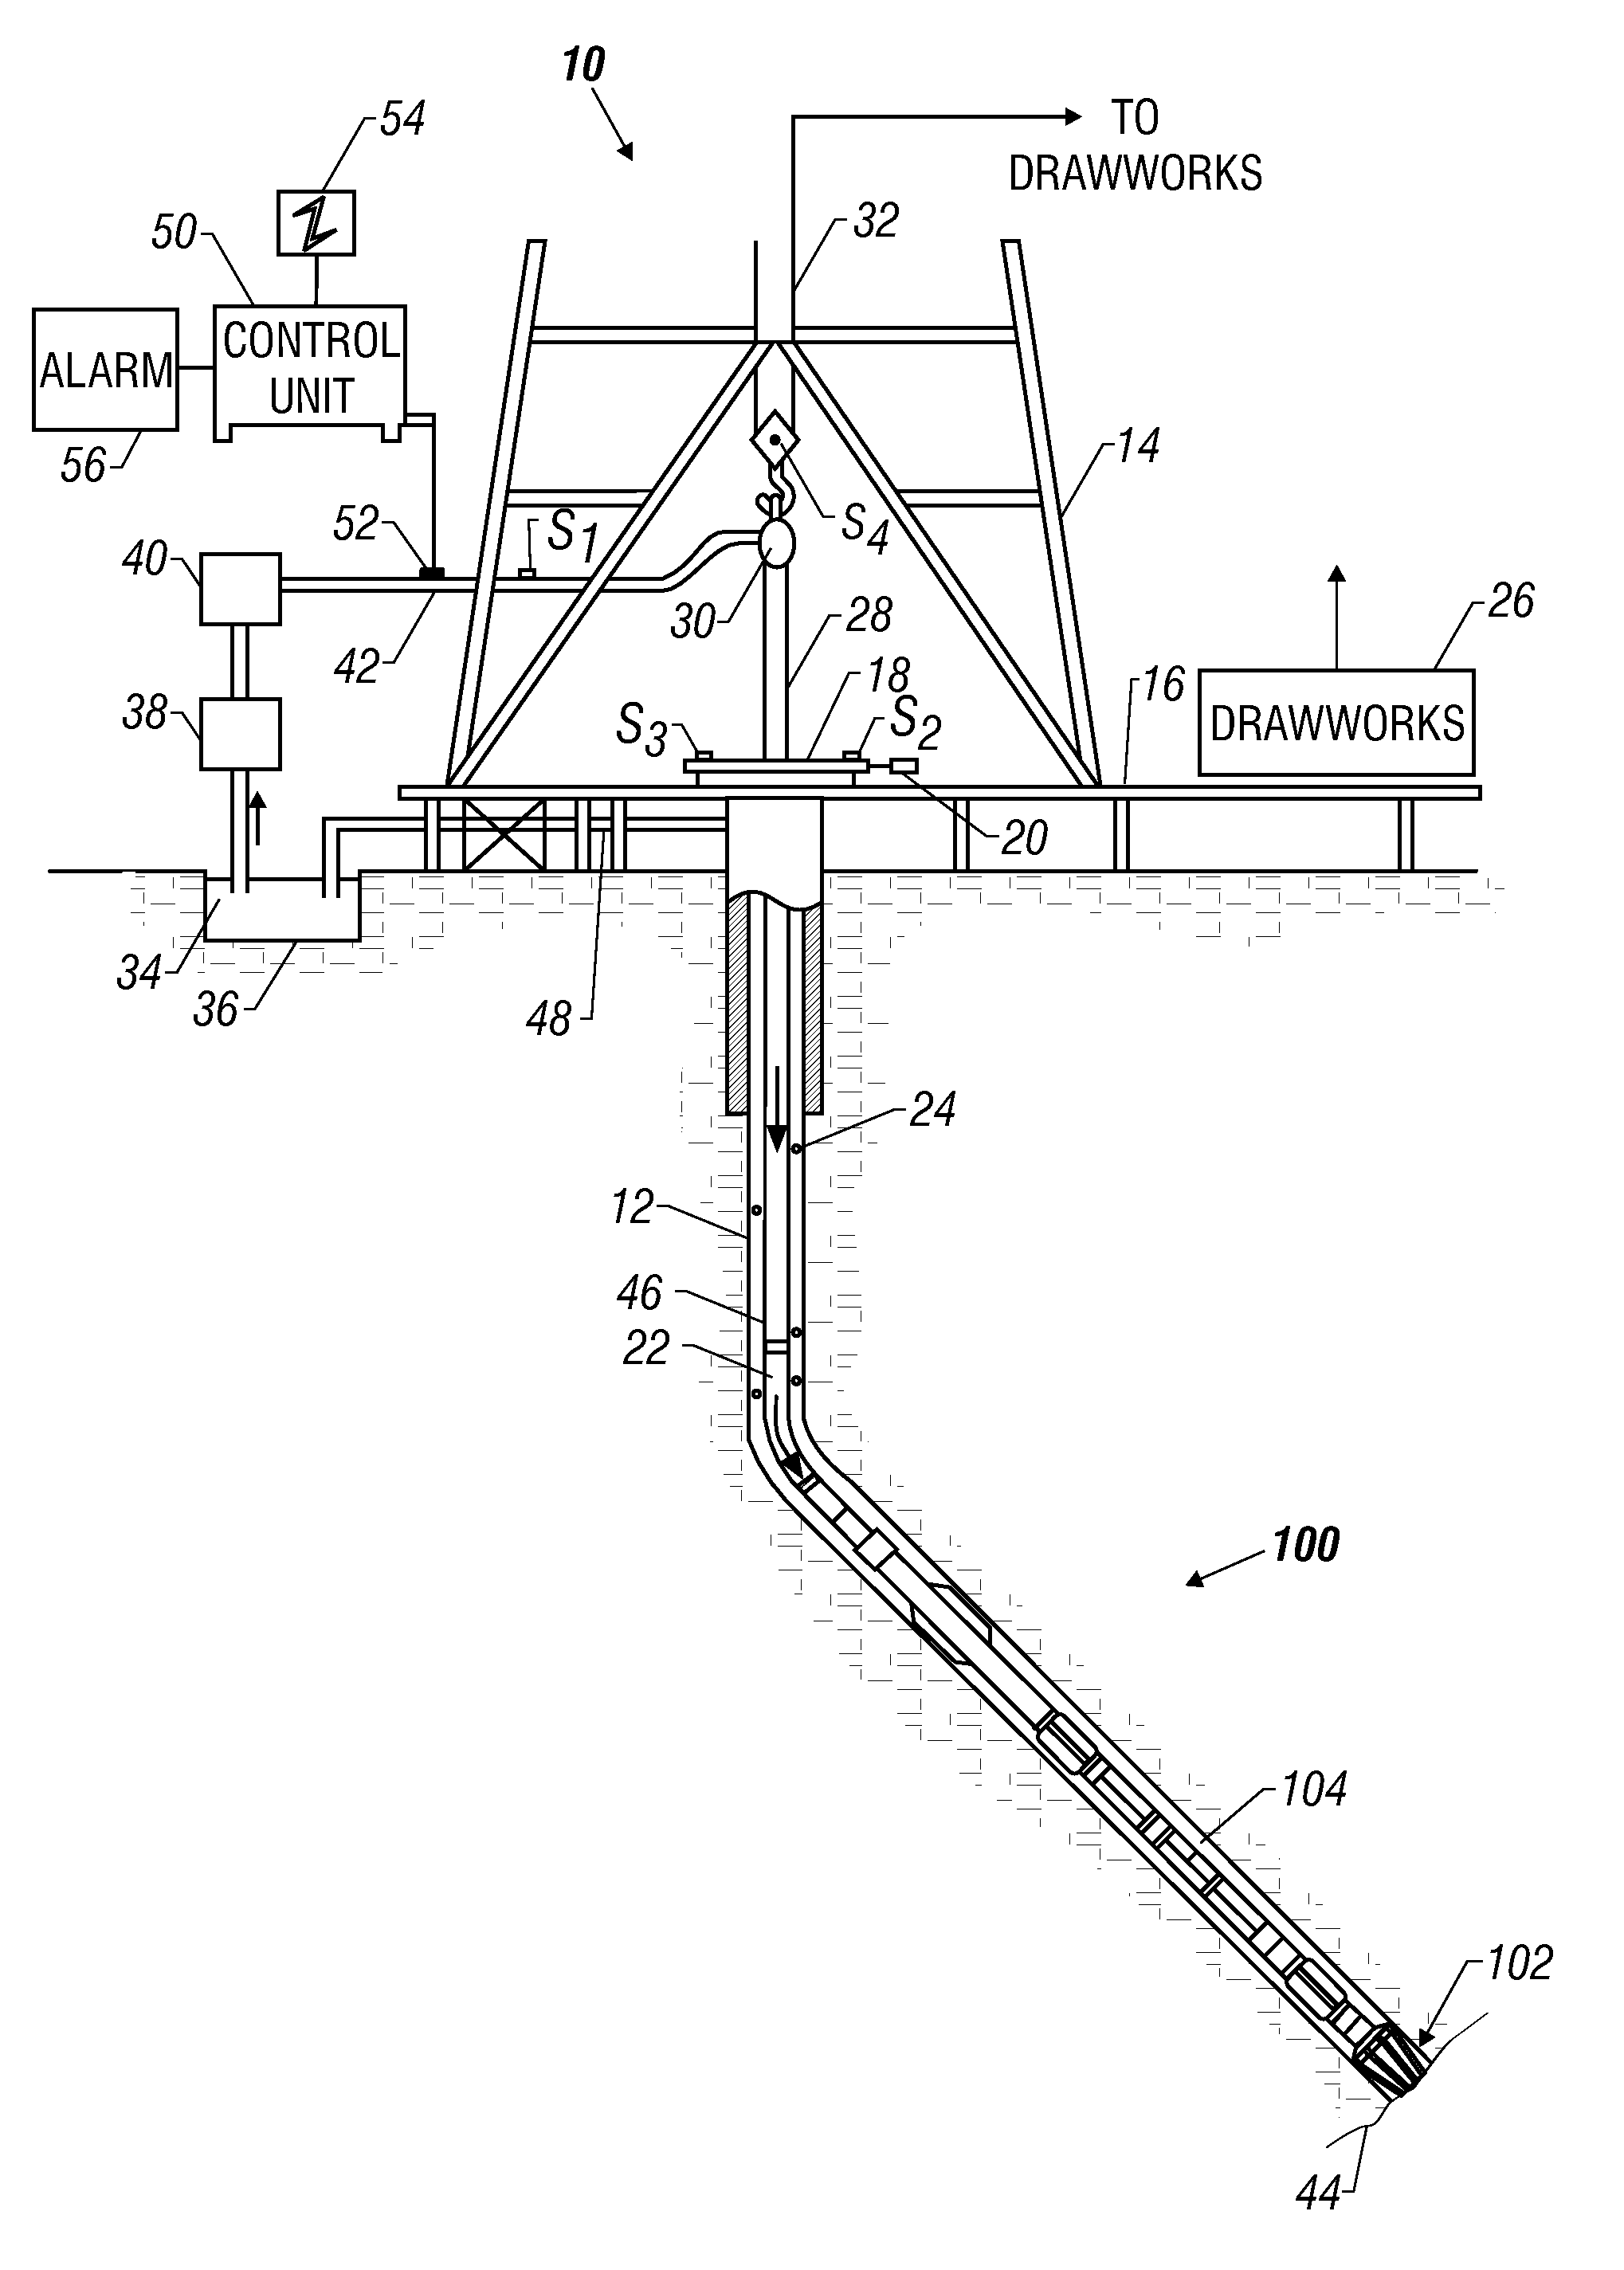 Automated steerable hole enlargement drilling device and methods